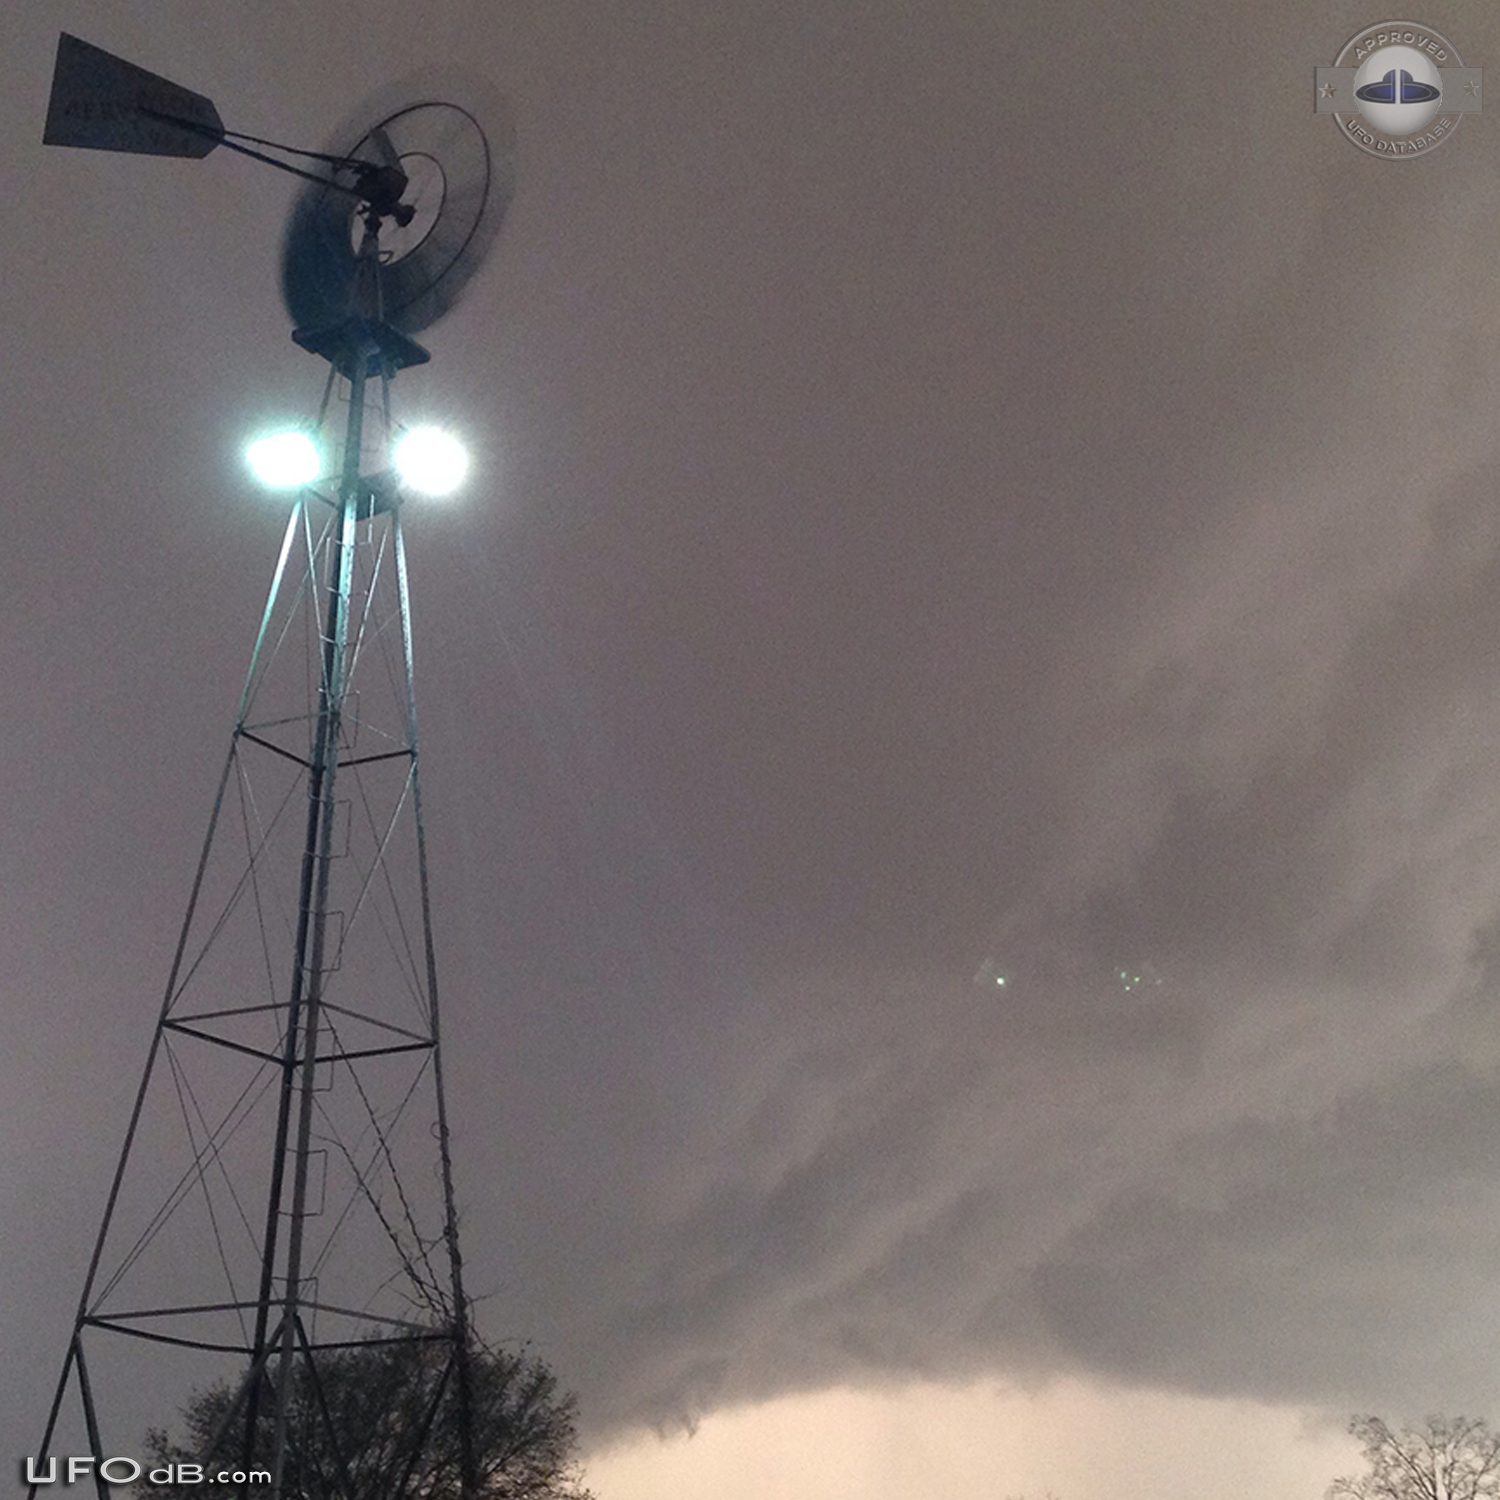 Diamond UFO hiding in the storm caught on picture over Katy Texas 2014 UFO Picture #573-3